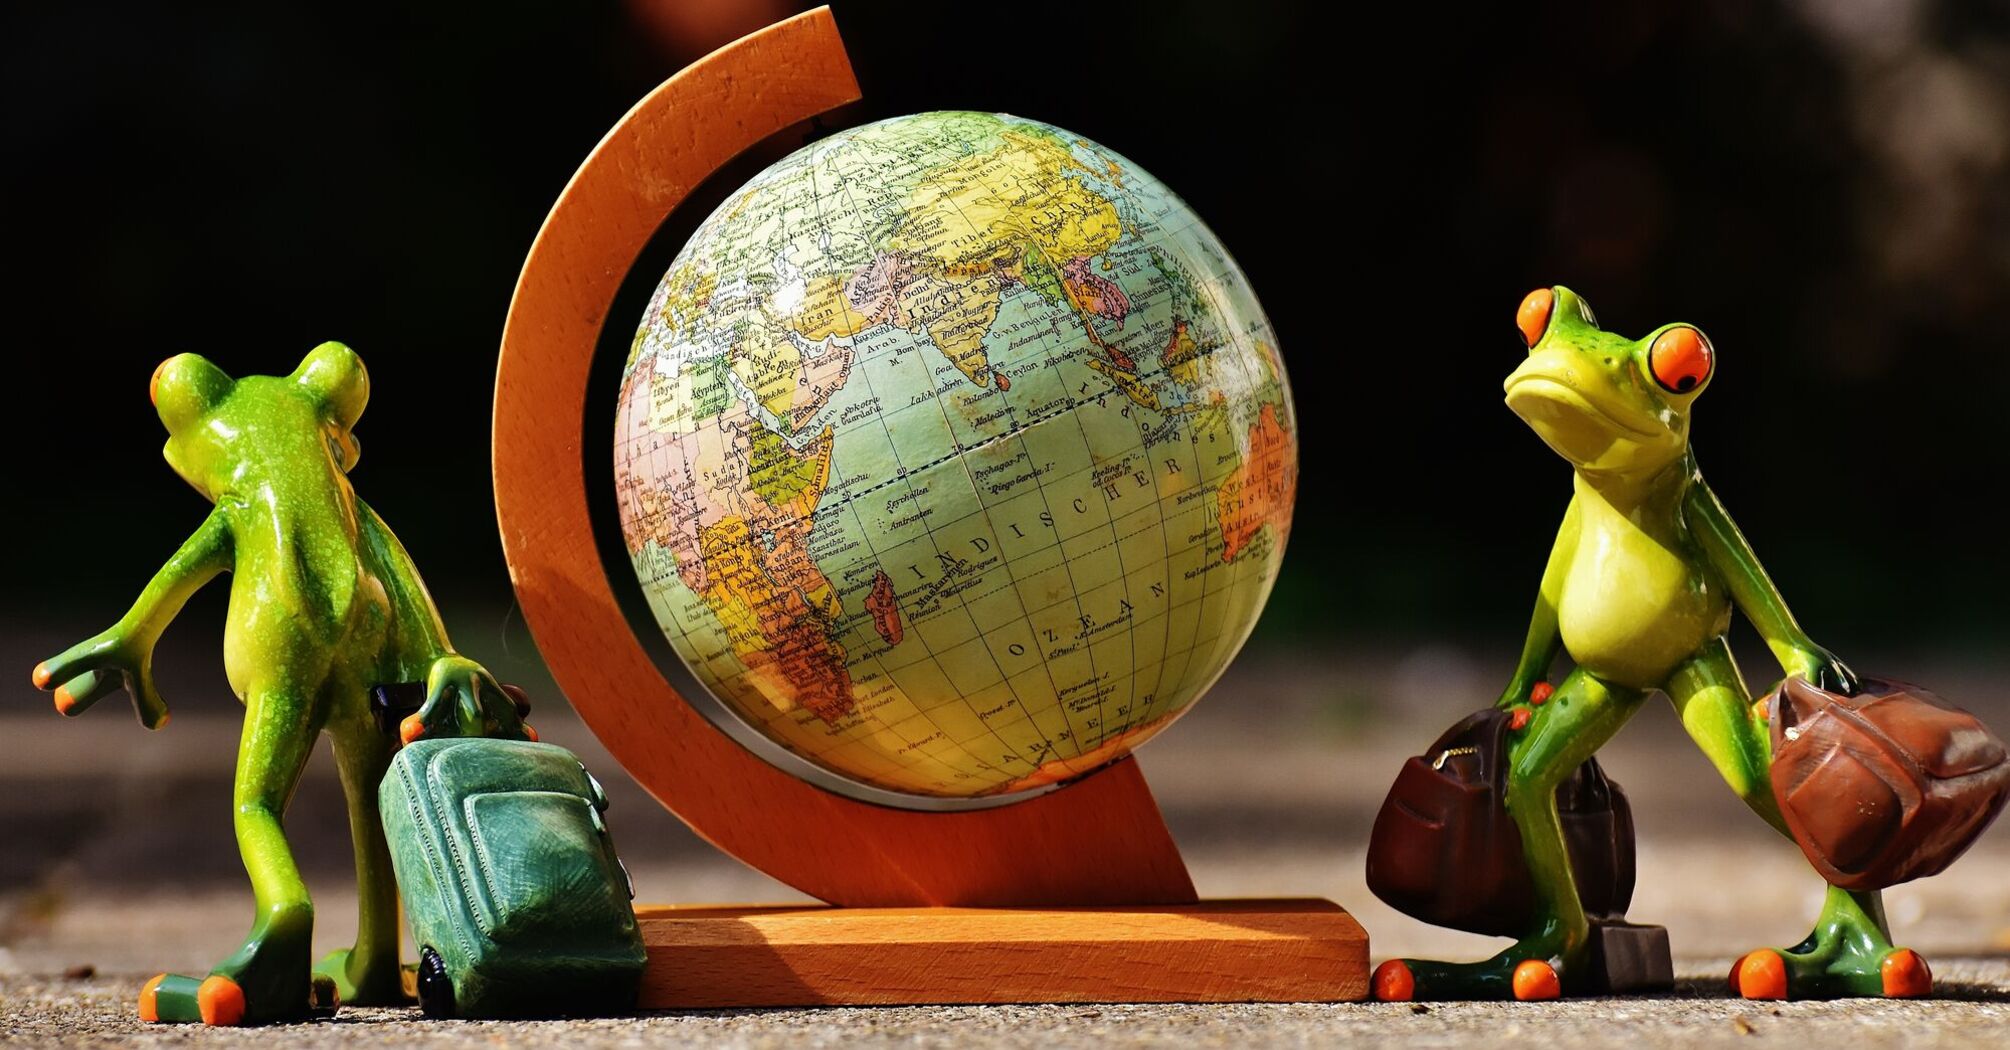 Two frog figurines, one standing and one sitting, appear ready for an adventure with a small suitcase and a globe